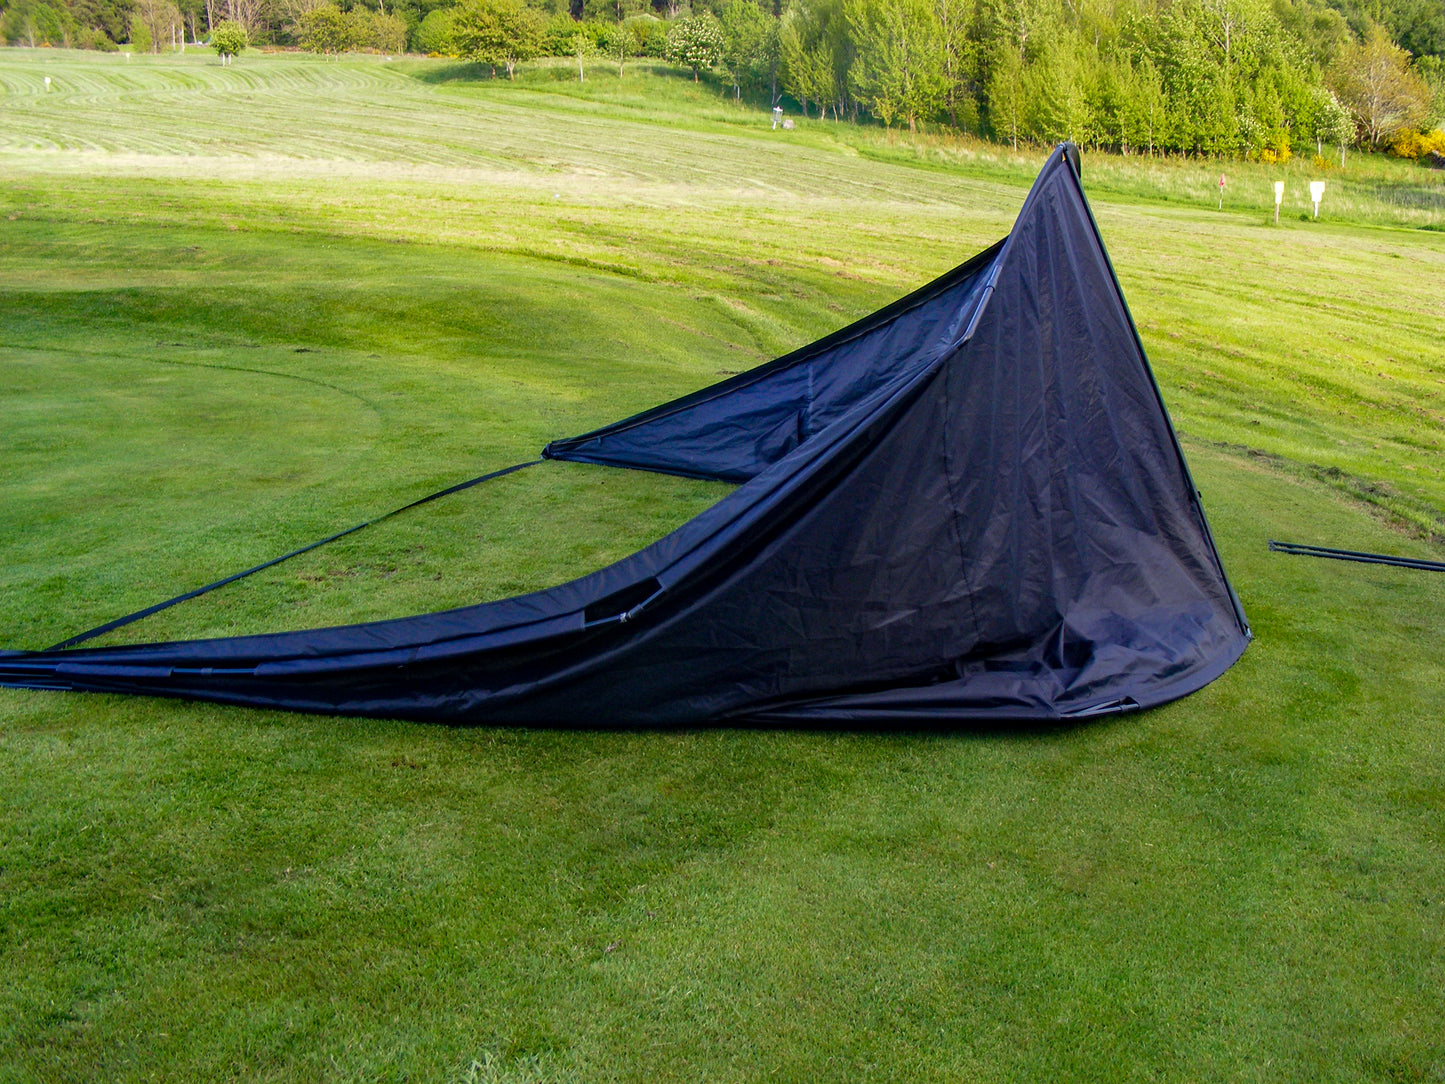 The Golf Tent Pro (Includes the hitting Netting (FREE of charge)